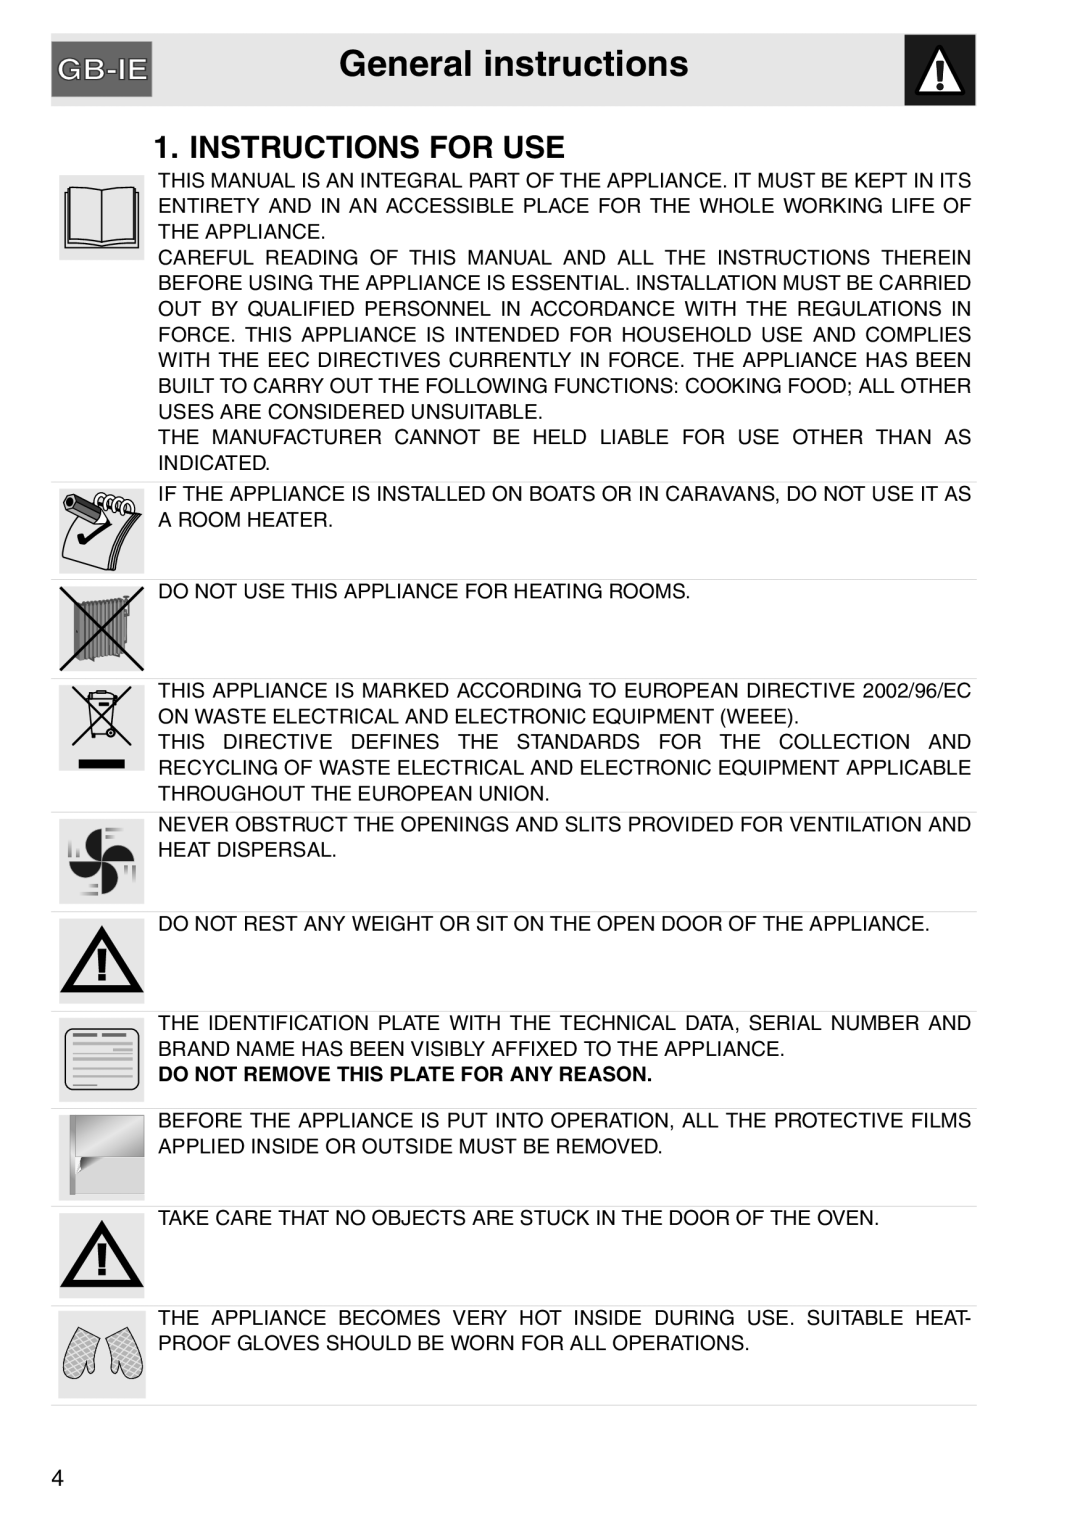 Smeg SAP112-8 manual General instructions, Instructions For Use, Do Not Remove This Plate For Any Reason 